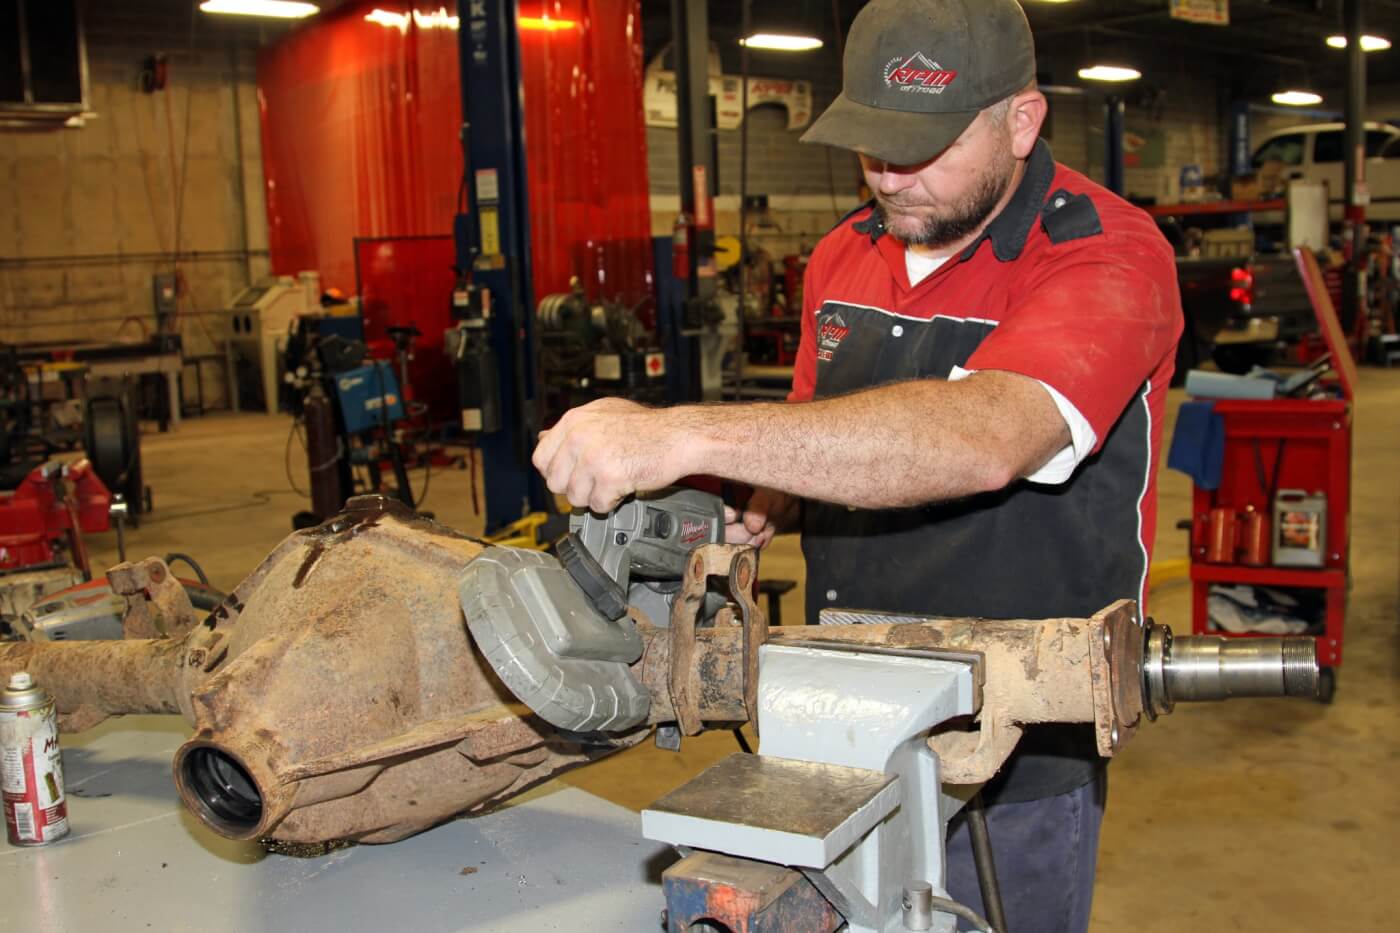 11. After taking careful measurements to determine the leaf spring pad location as well as the precise axle tube length Nelson uses a portable band saw to cut the axle tubes. The saw makes quick work of the 1/4-inch thin wall tubing.